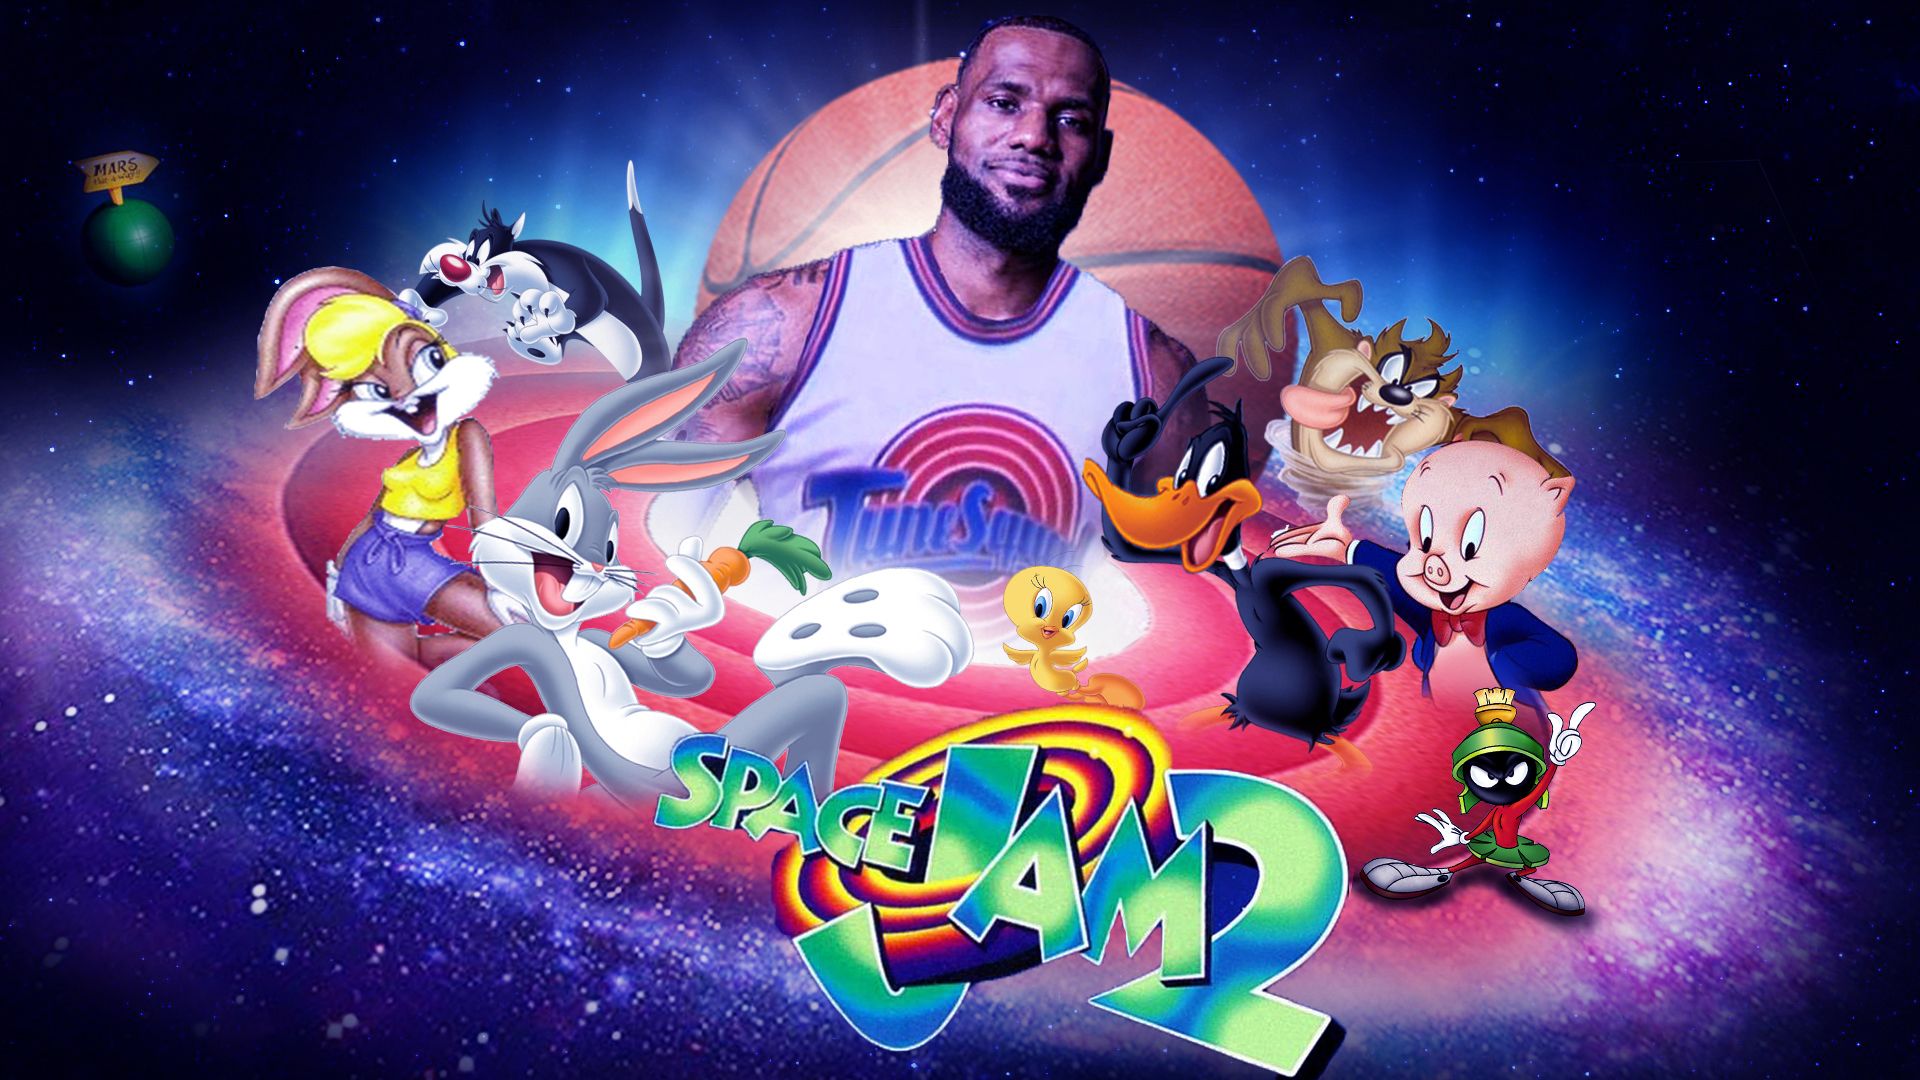 Game on LeBron James balls out in Space Jam A New Legacy first look   Space jam Looney tunes wallpaper Looney tunes space jam